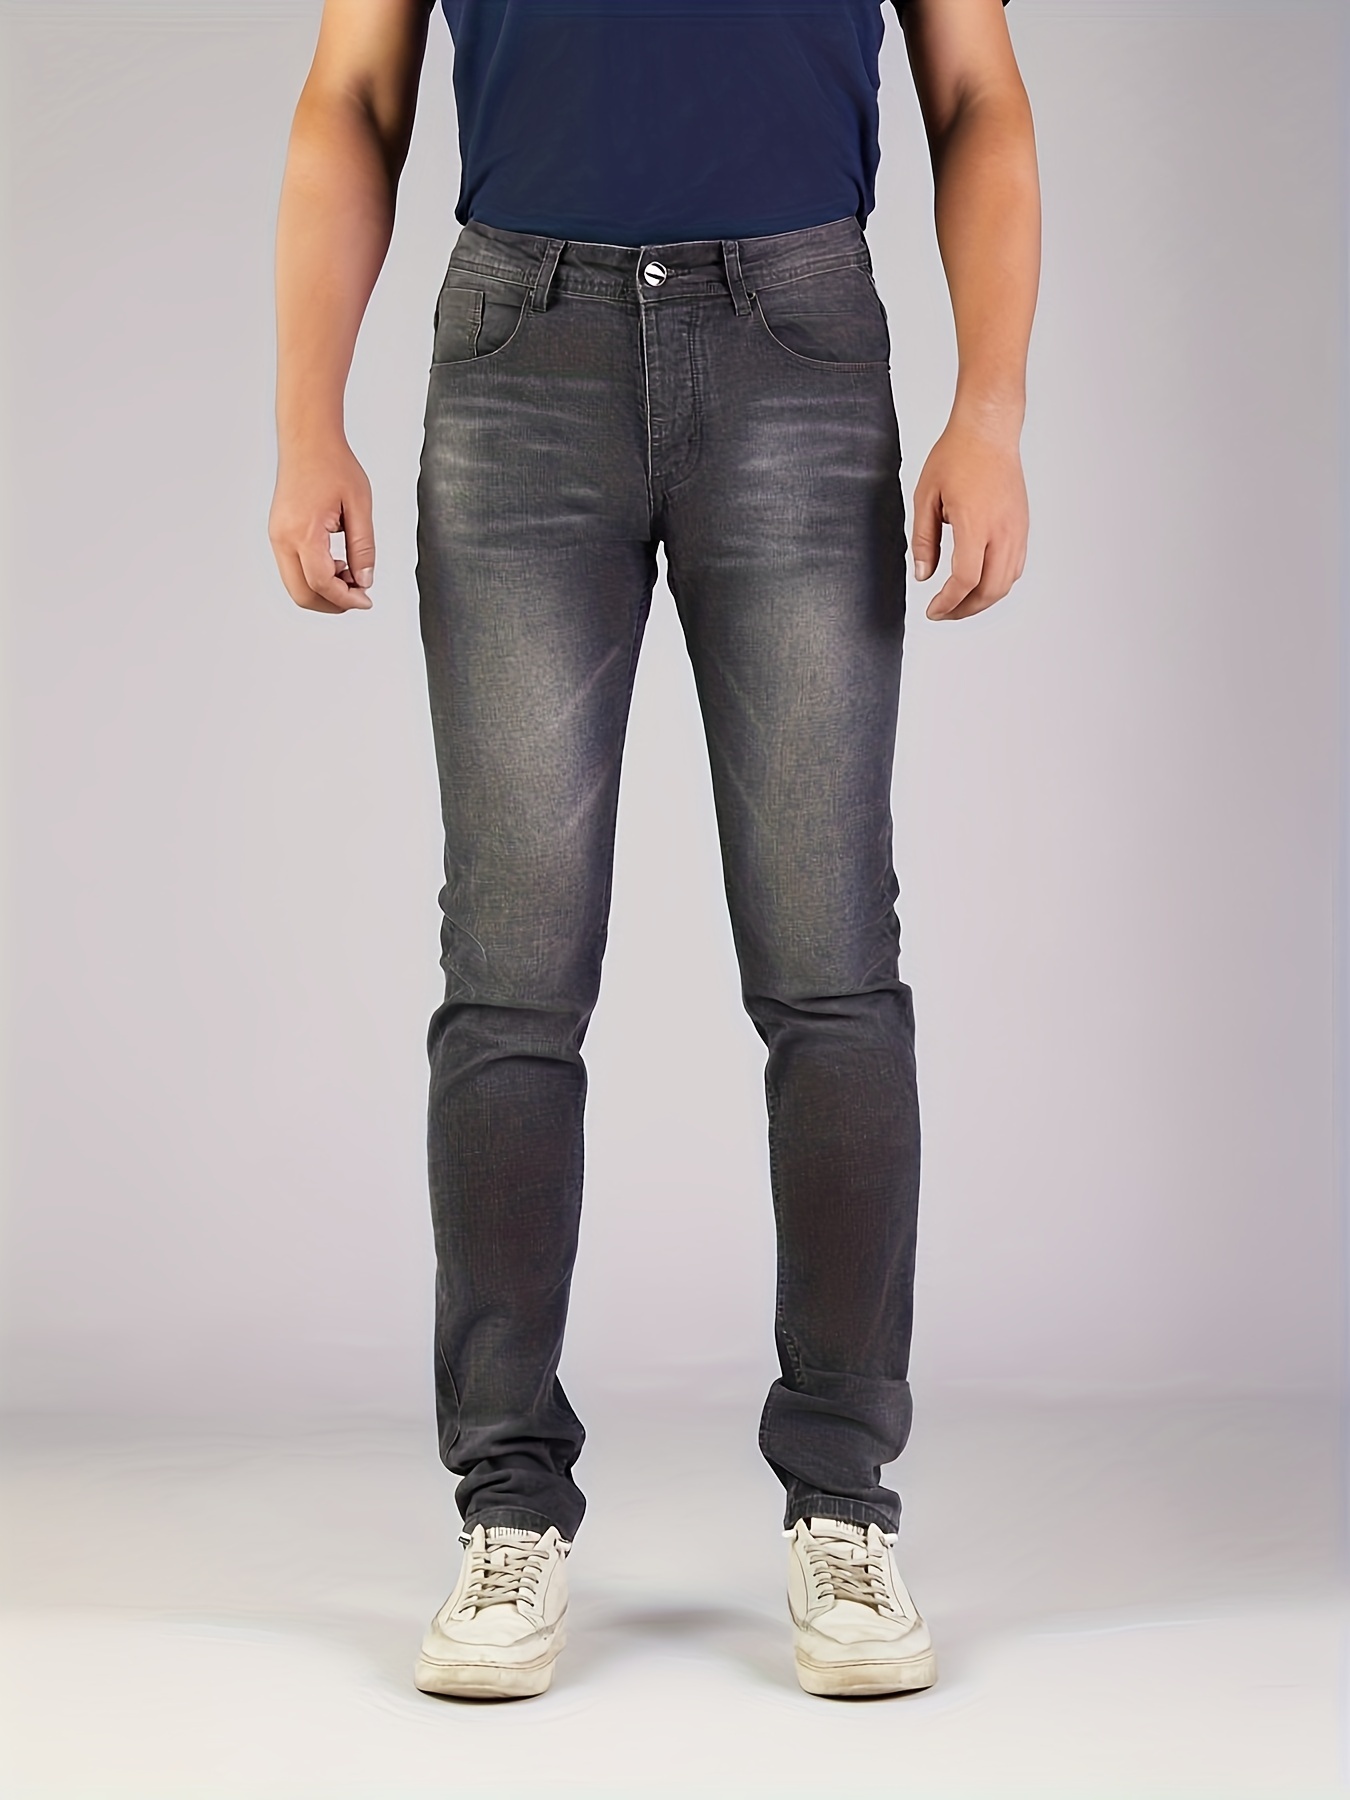 Slim Fit Chic Jeans, Men's Casual Street Style Distressed Stretch Denim  Pants